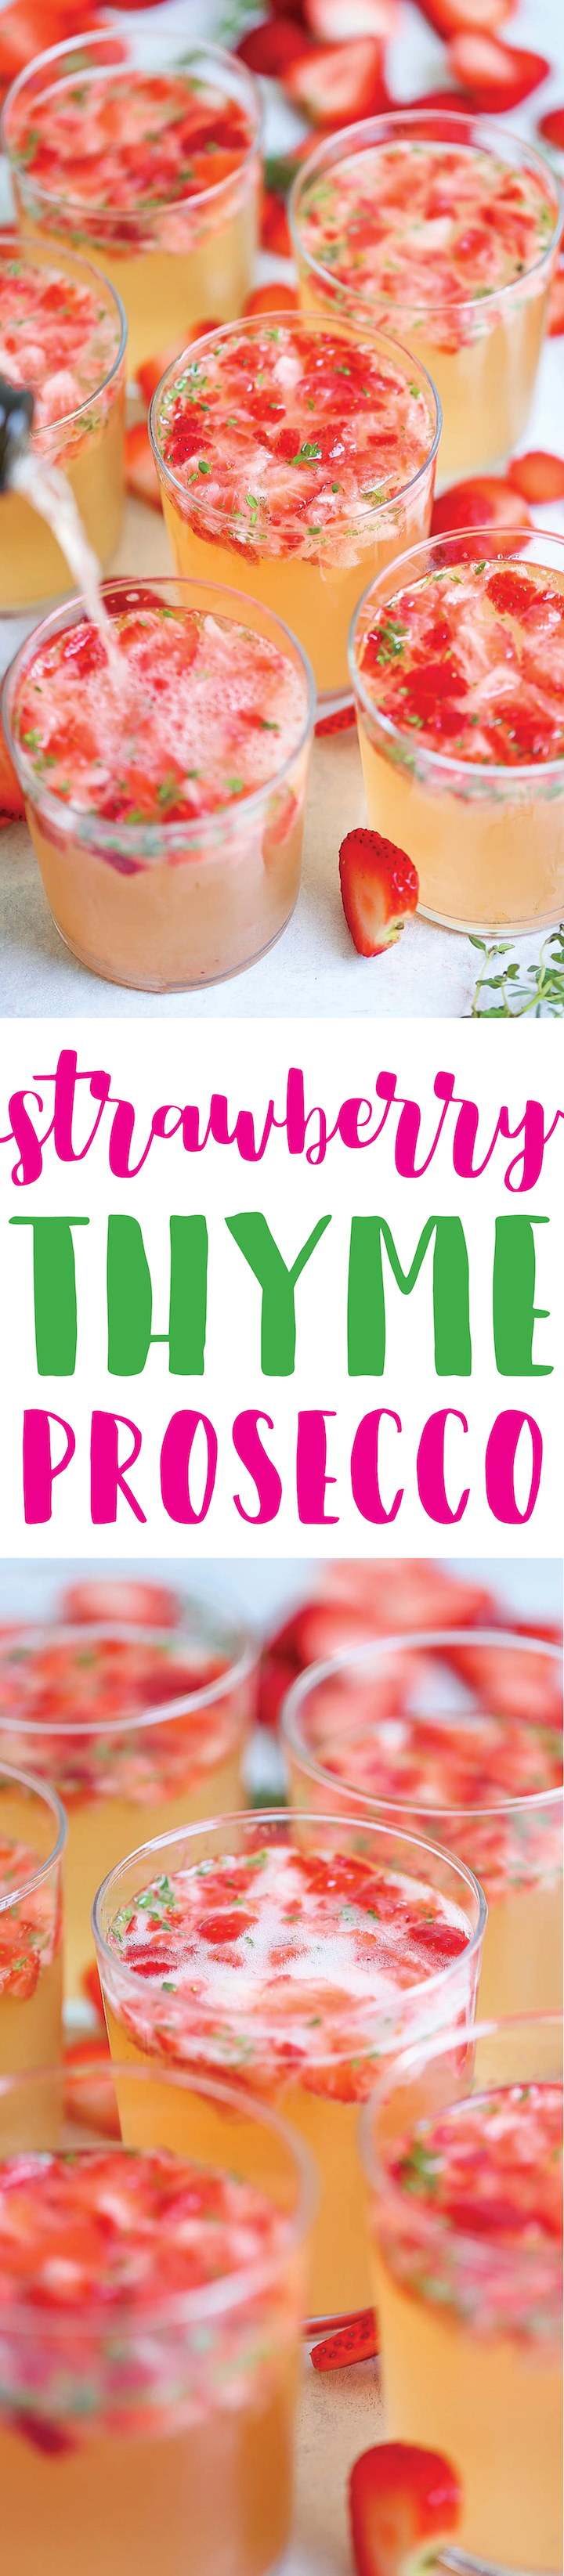 Strawberry Thyme Prosecco - A 5-min cocktail! Sweet, bubbly and refreshing with just the perfect amount of strawberries, thyme, limoncello and prosecco!